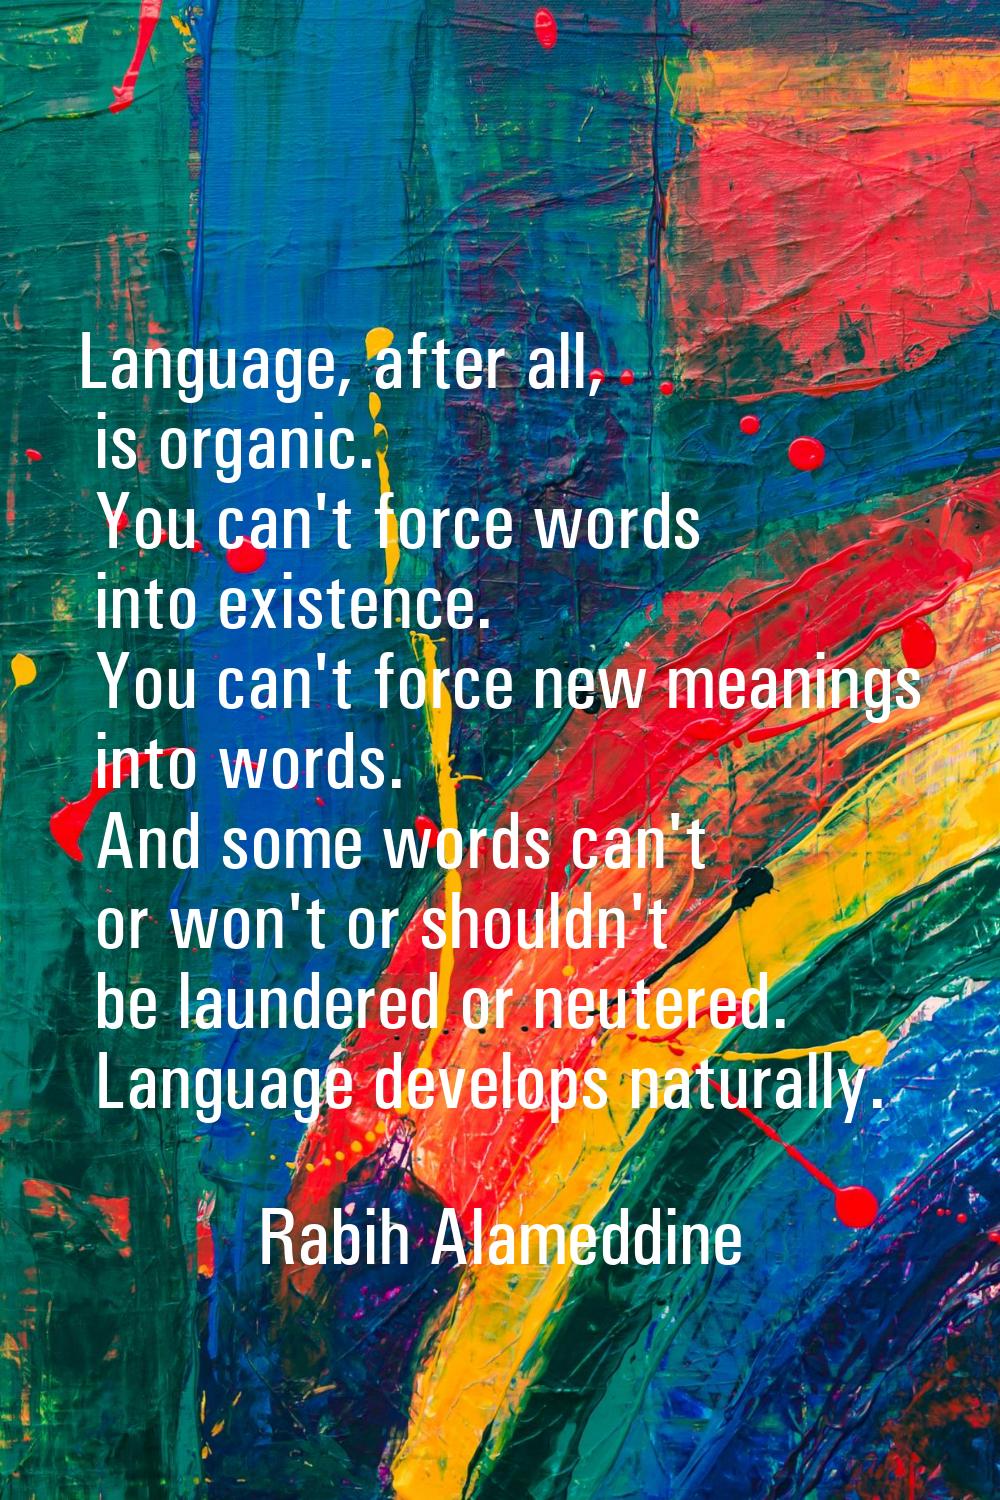 Language, after all, is organic. You can't force words into existence. You can't force new meanings